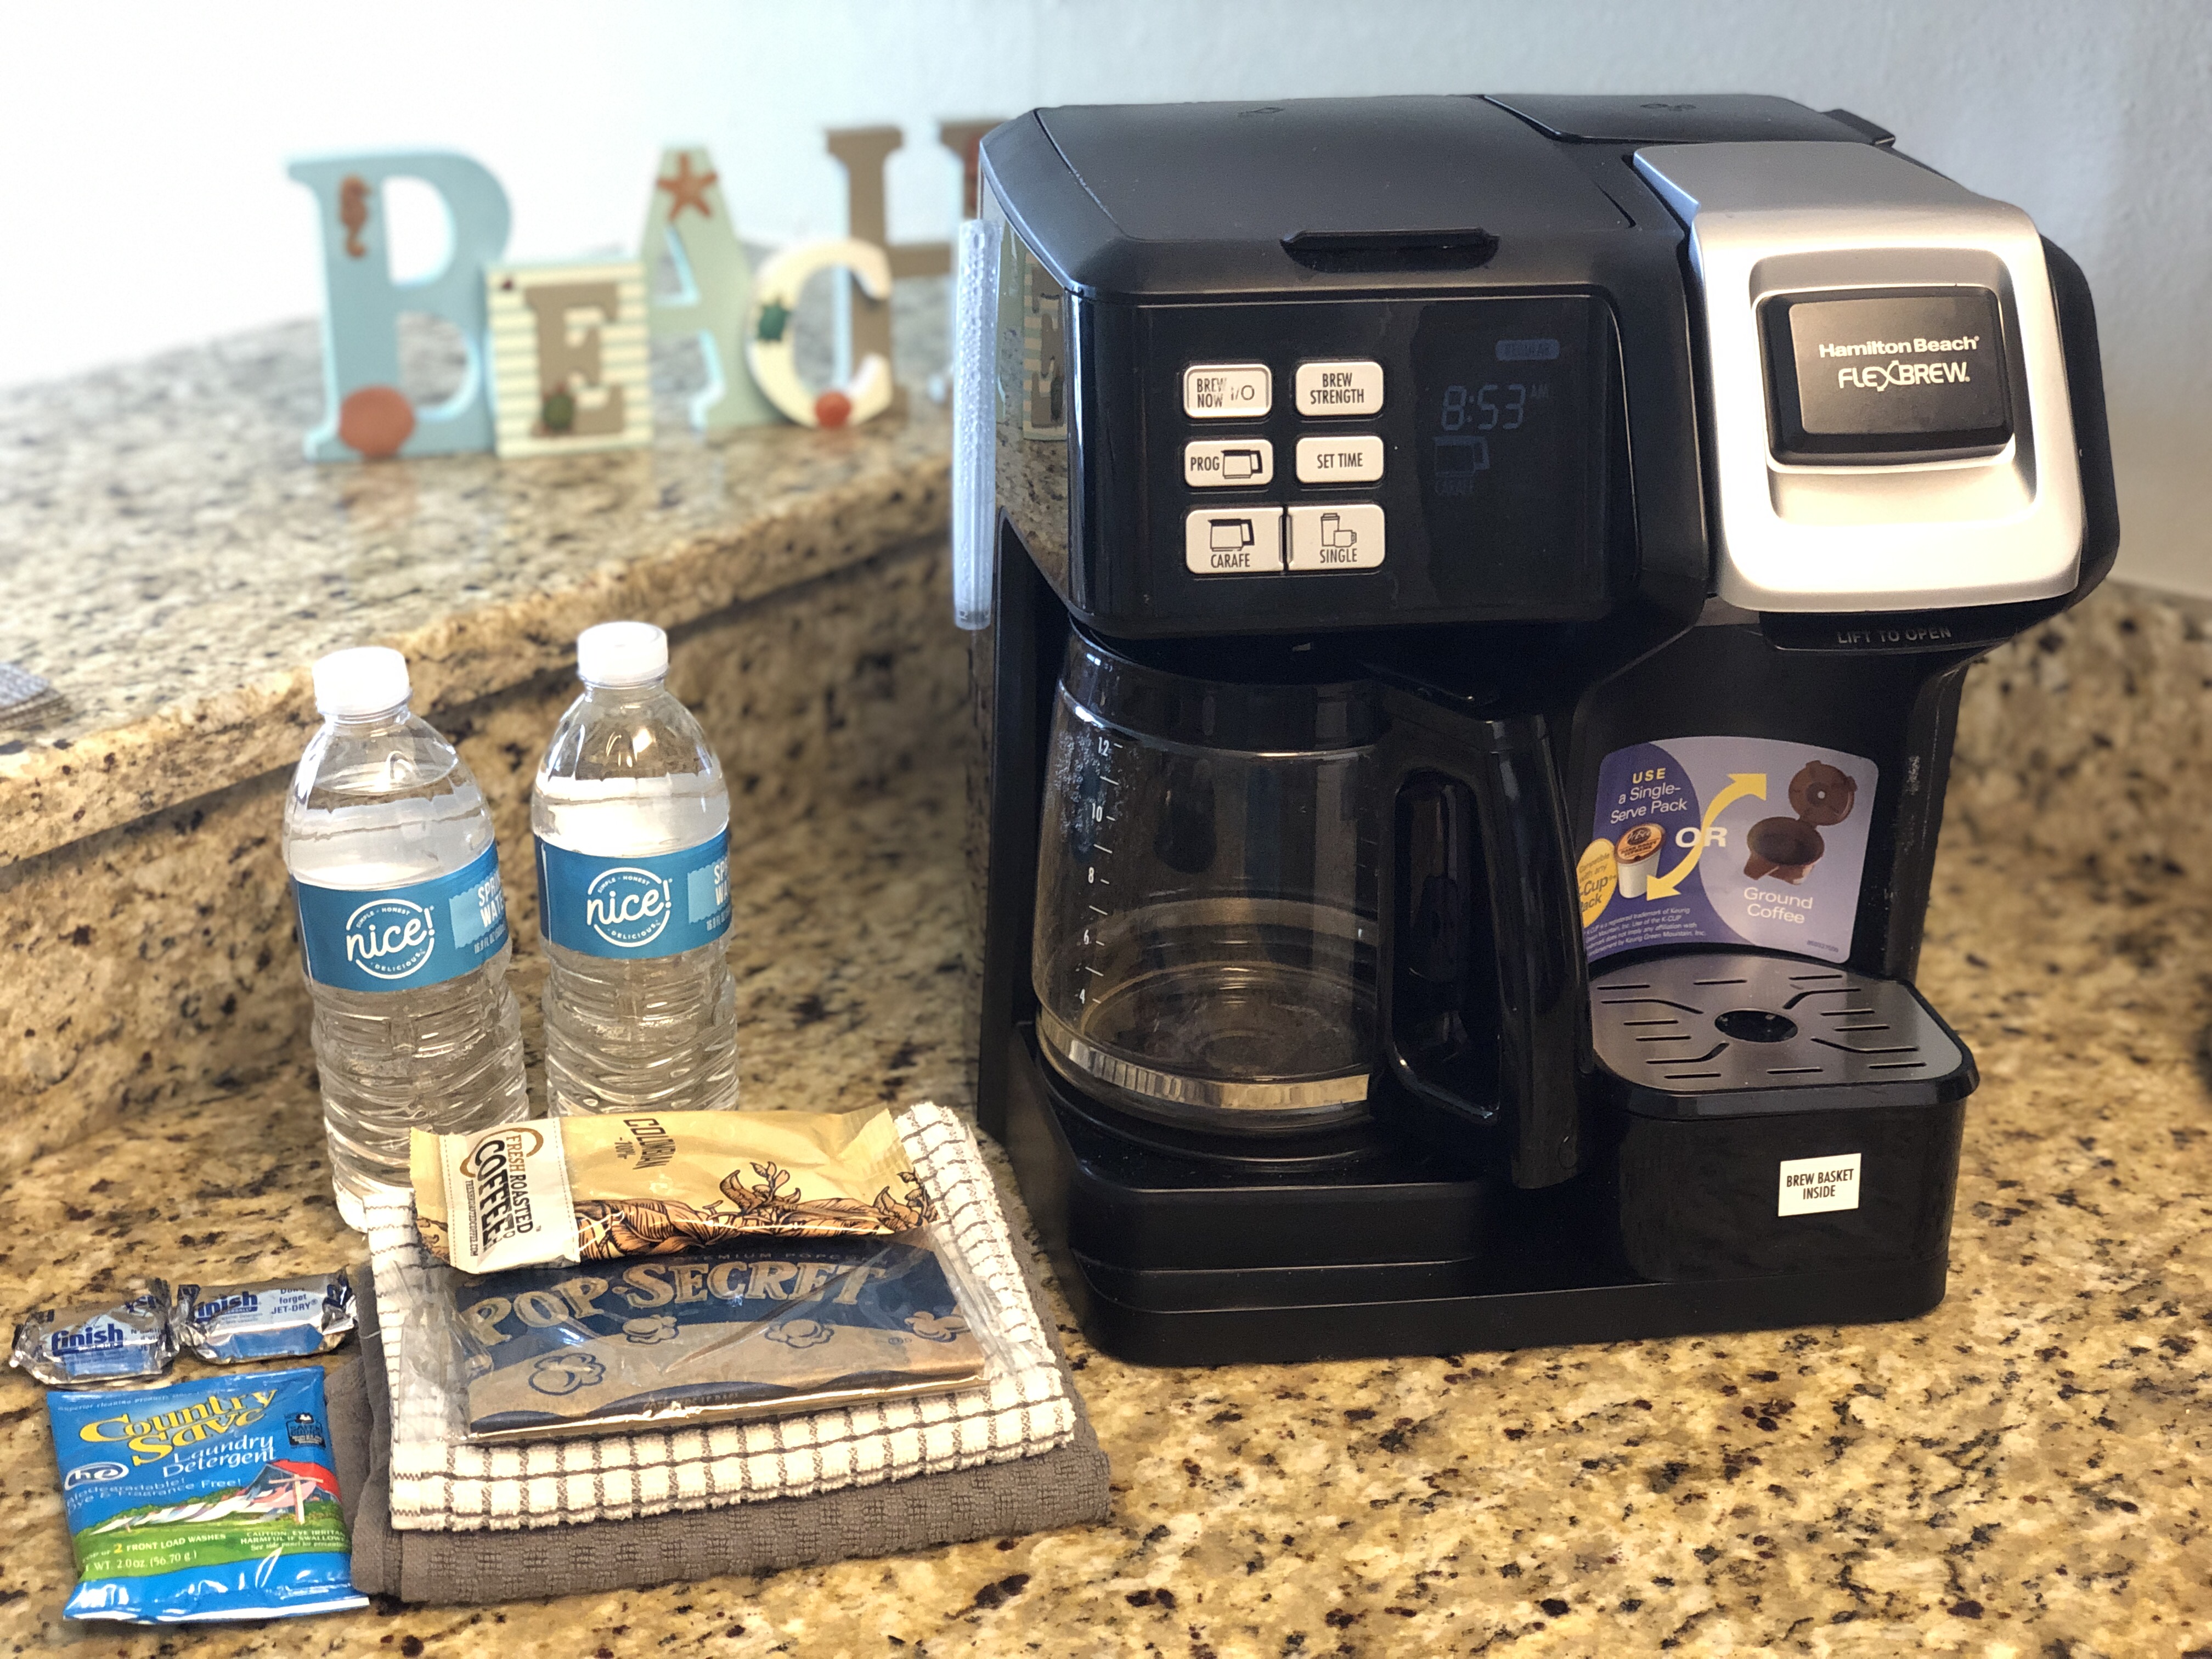 Coffee maker and start up supplies